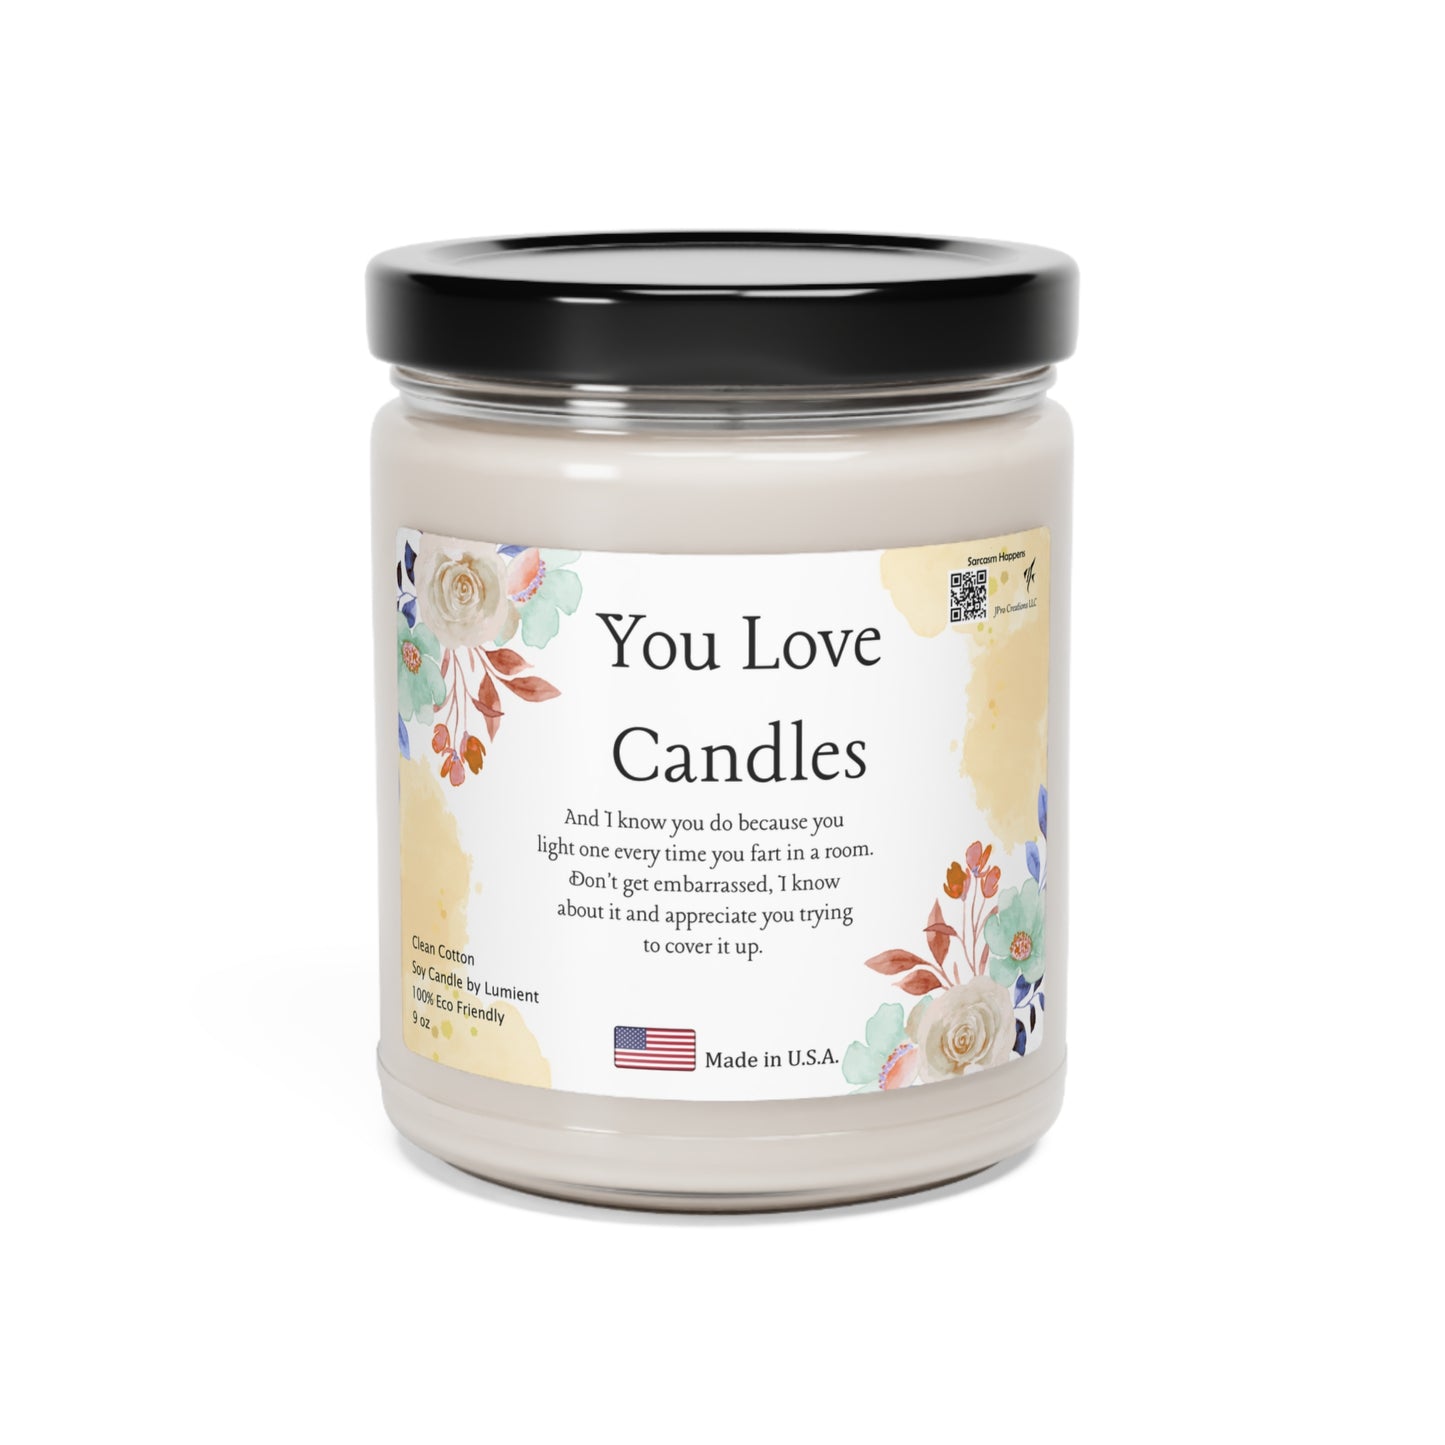 Sarcasm Happens - You Love Candles, Scented Soy Candle